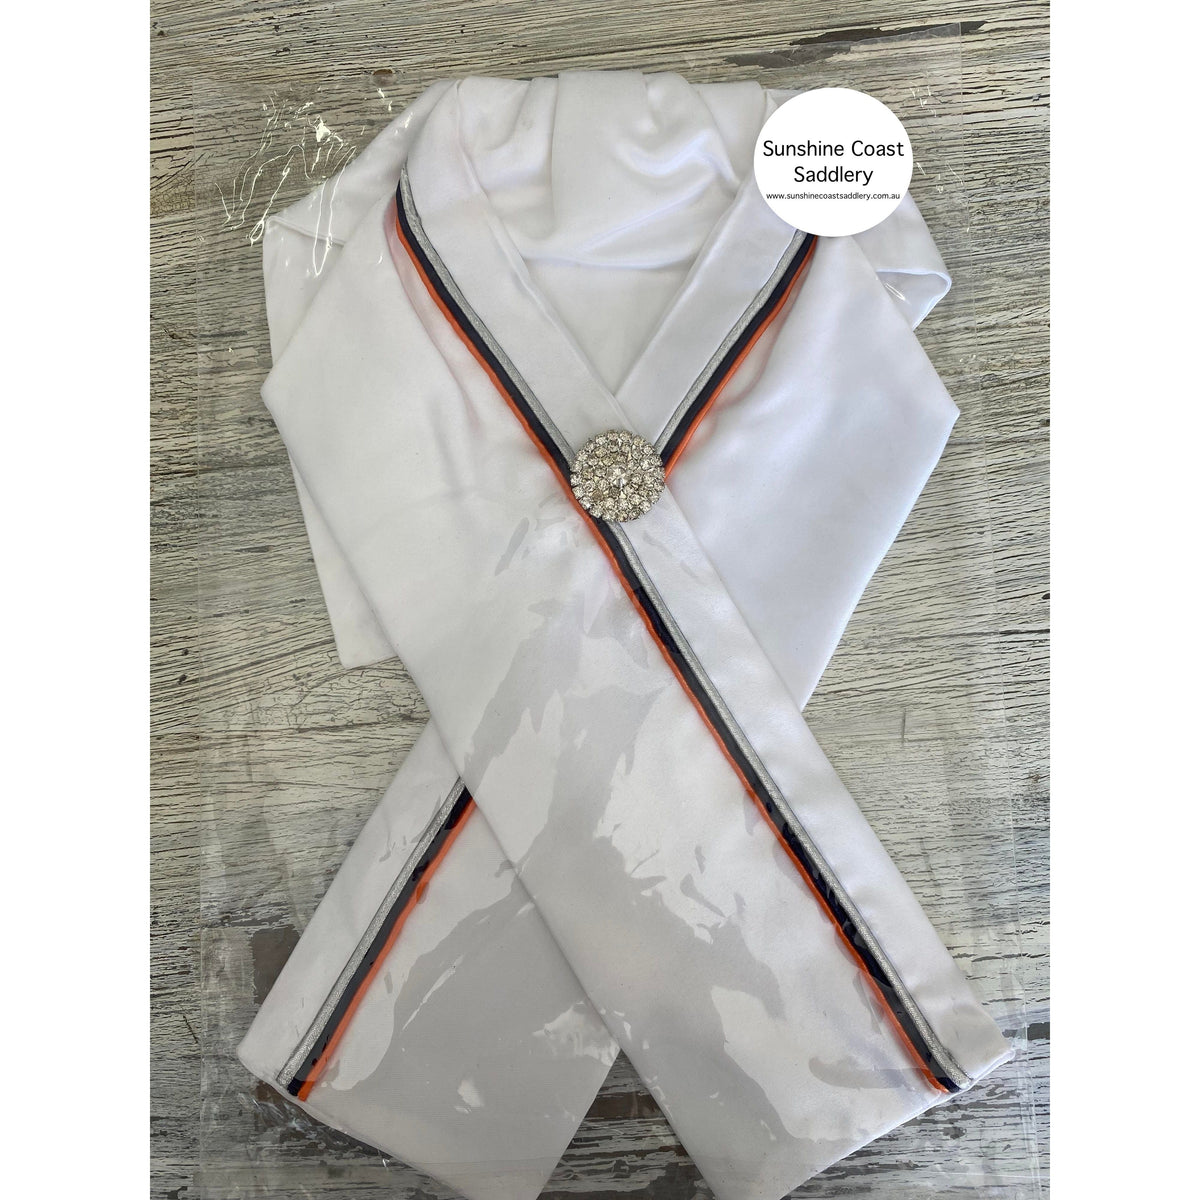 L SHARP Pre-Tied Satin Stock Tie in White with Orange Navy Silver Piping